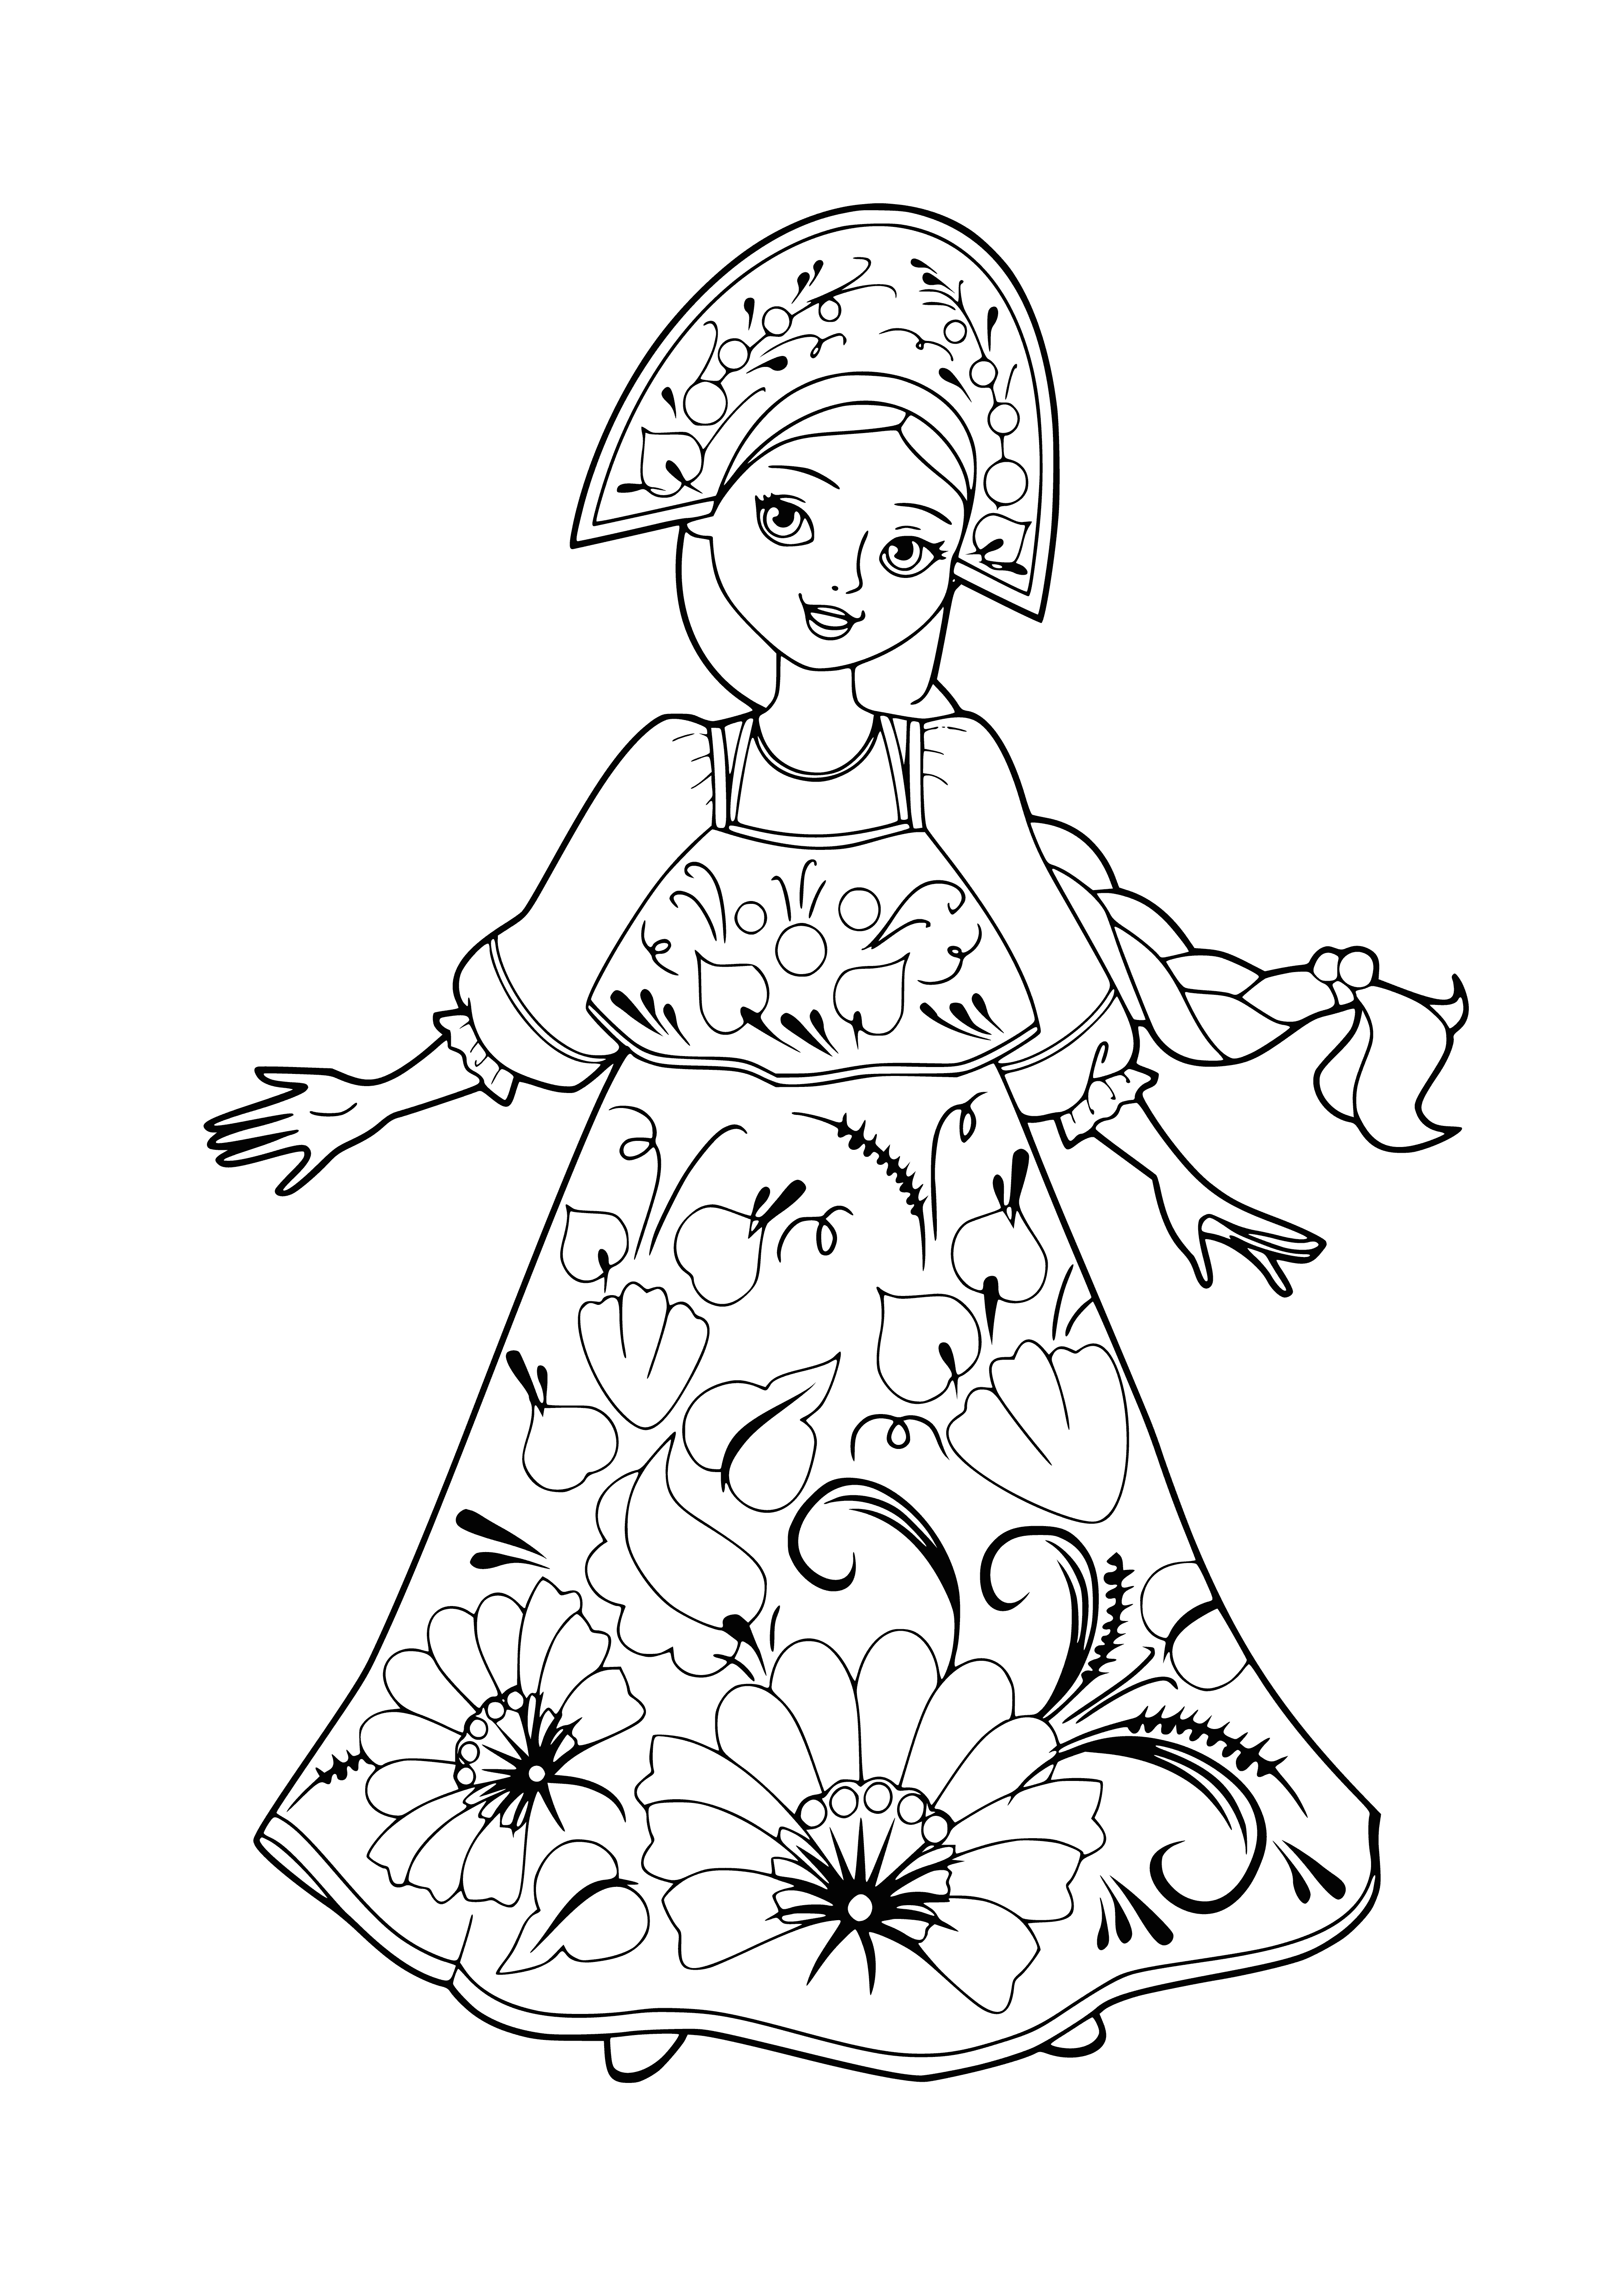 coloring page: Three women in traditional clothing stand in a row, wearing colorful dresses and headwear. Two hold instruments, one has arms crossed. #multicultural #traditions